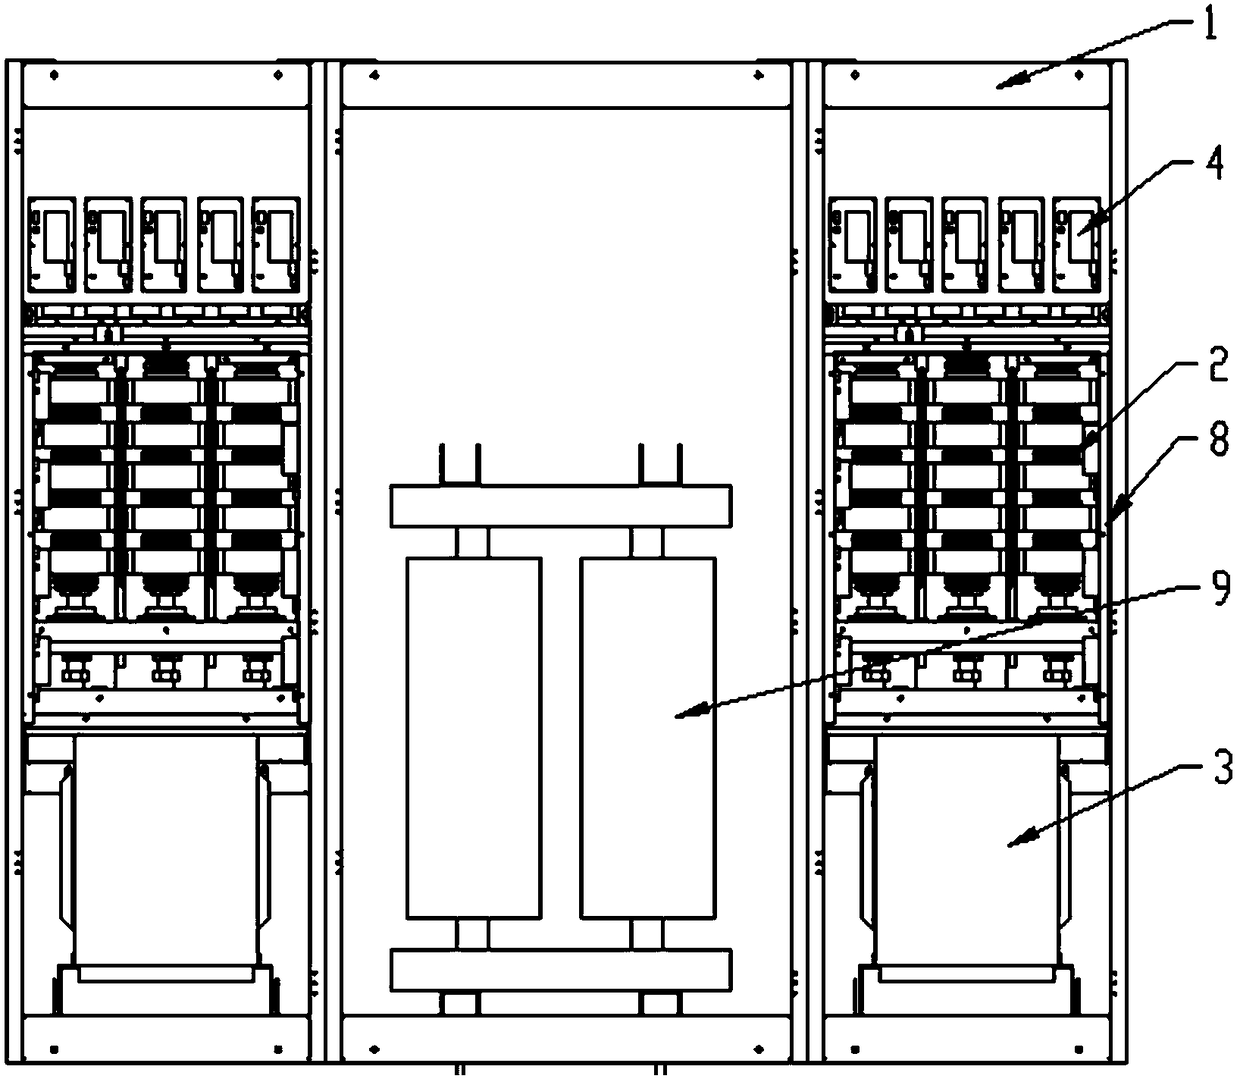 A power cabinet for static frequency conversion starting of a large-capacity synchronous machine